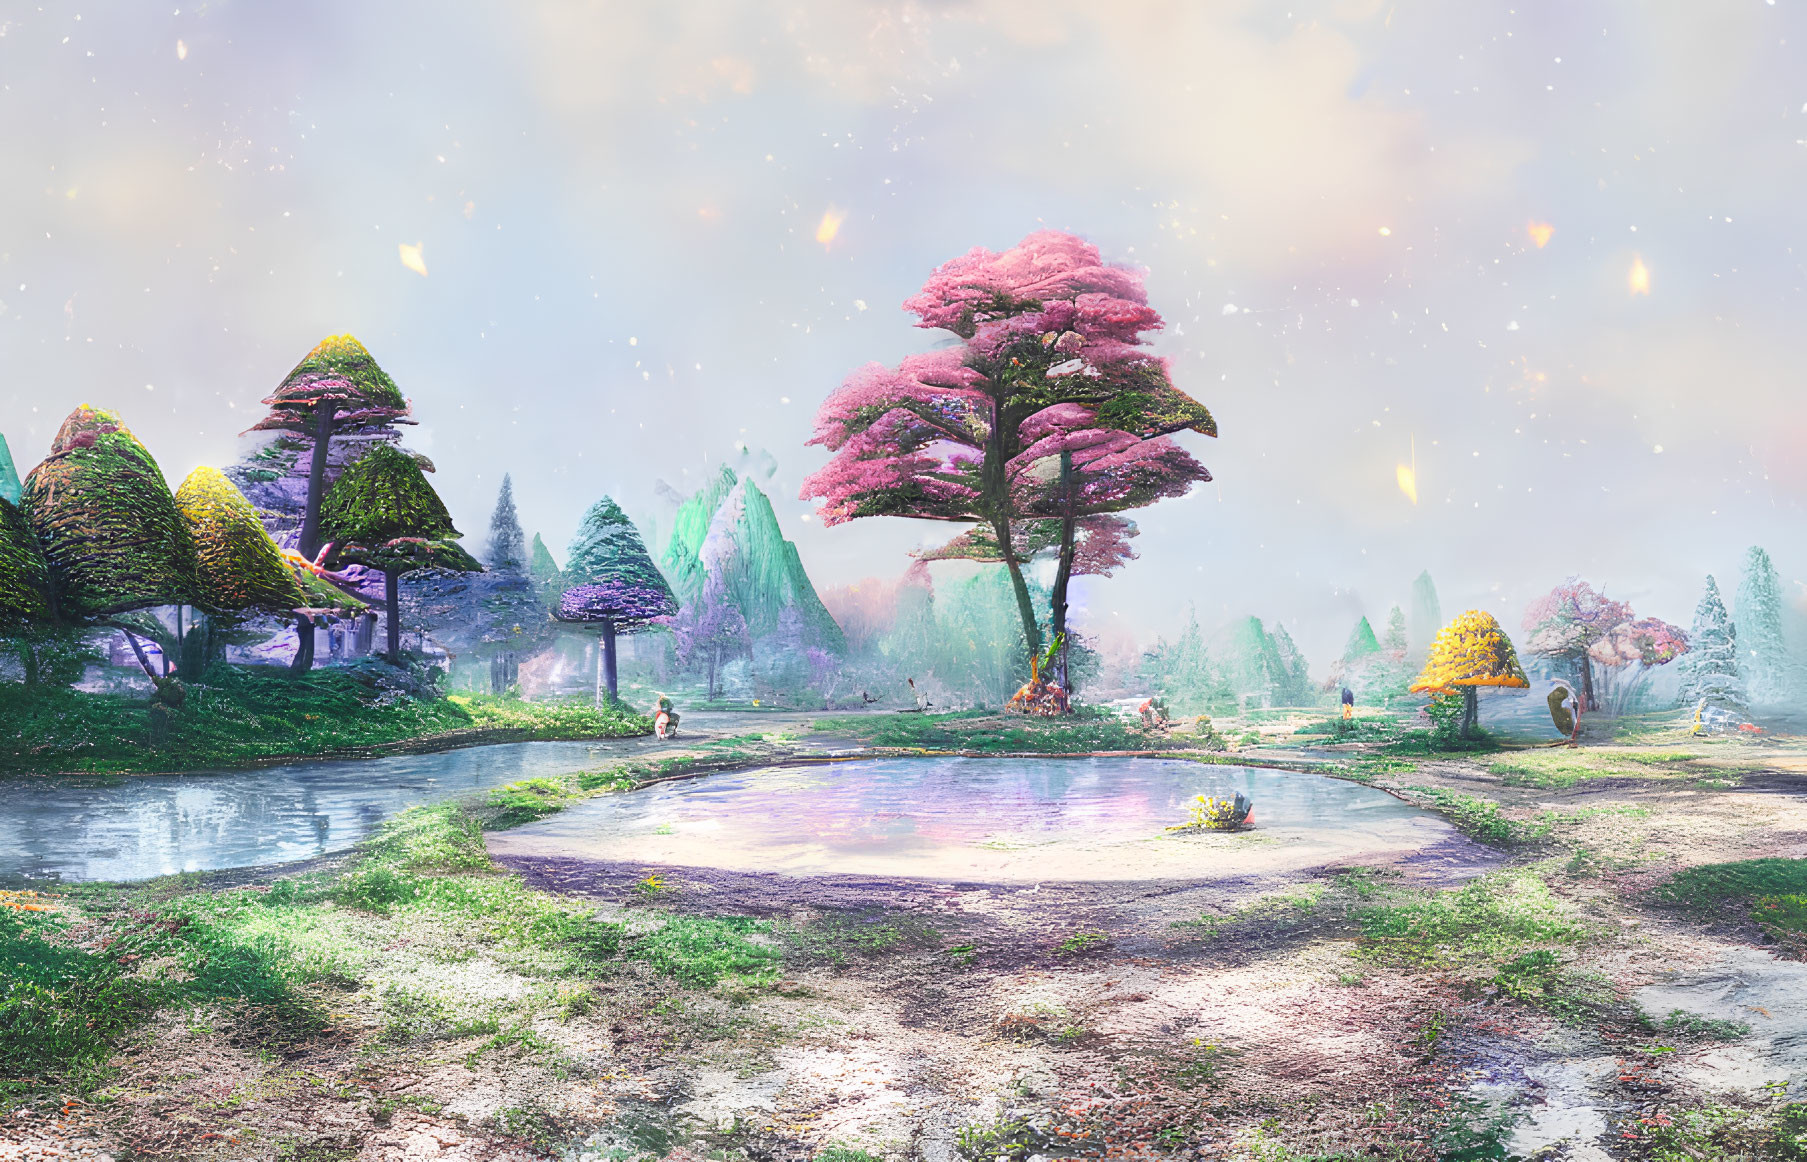 Serene fantasy landscape with pink tree, pond, and glowing particles